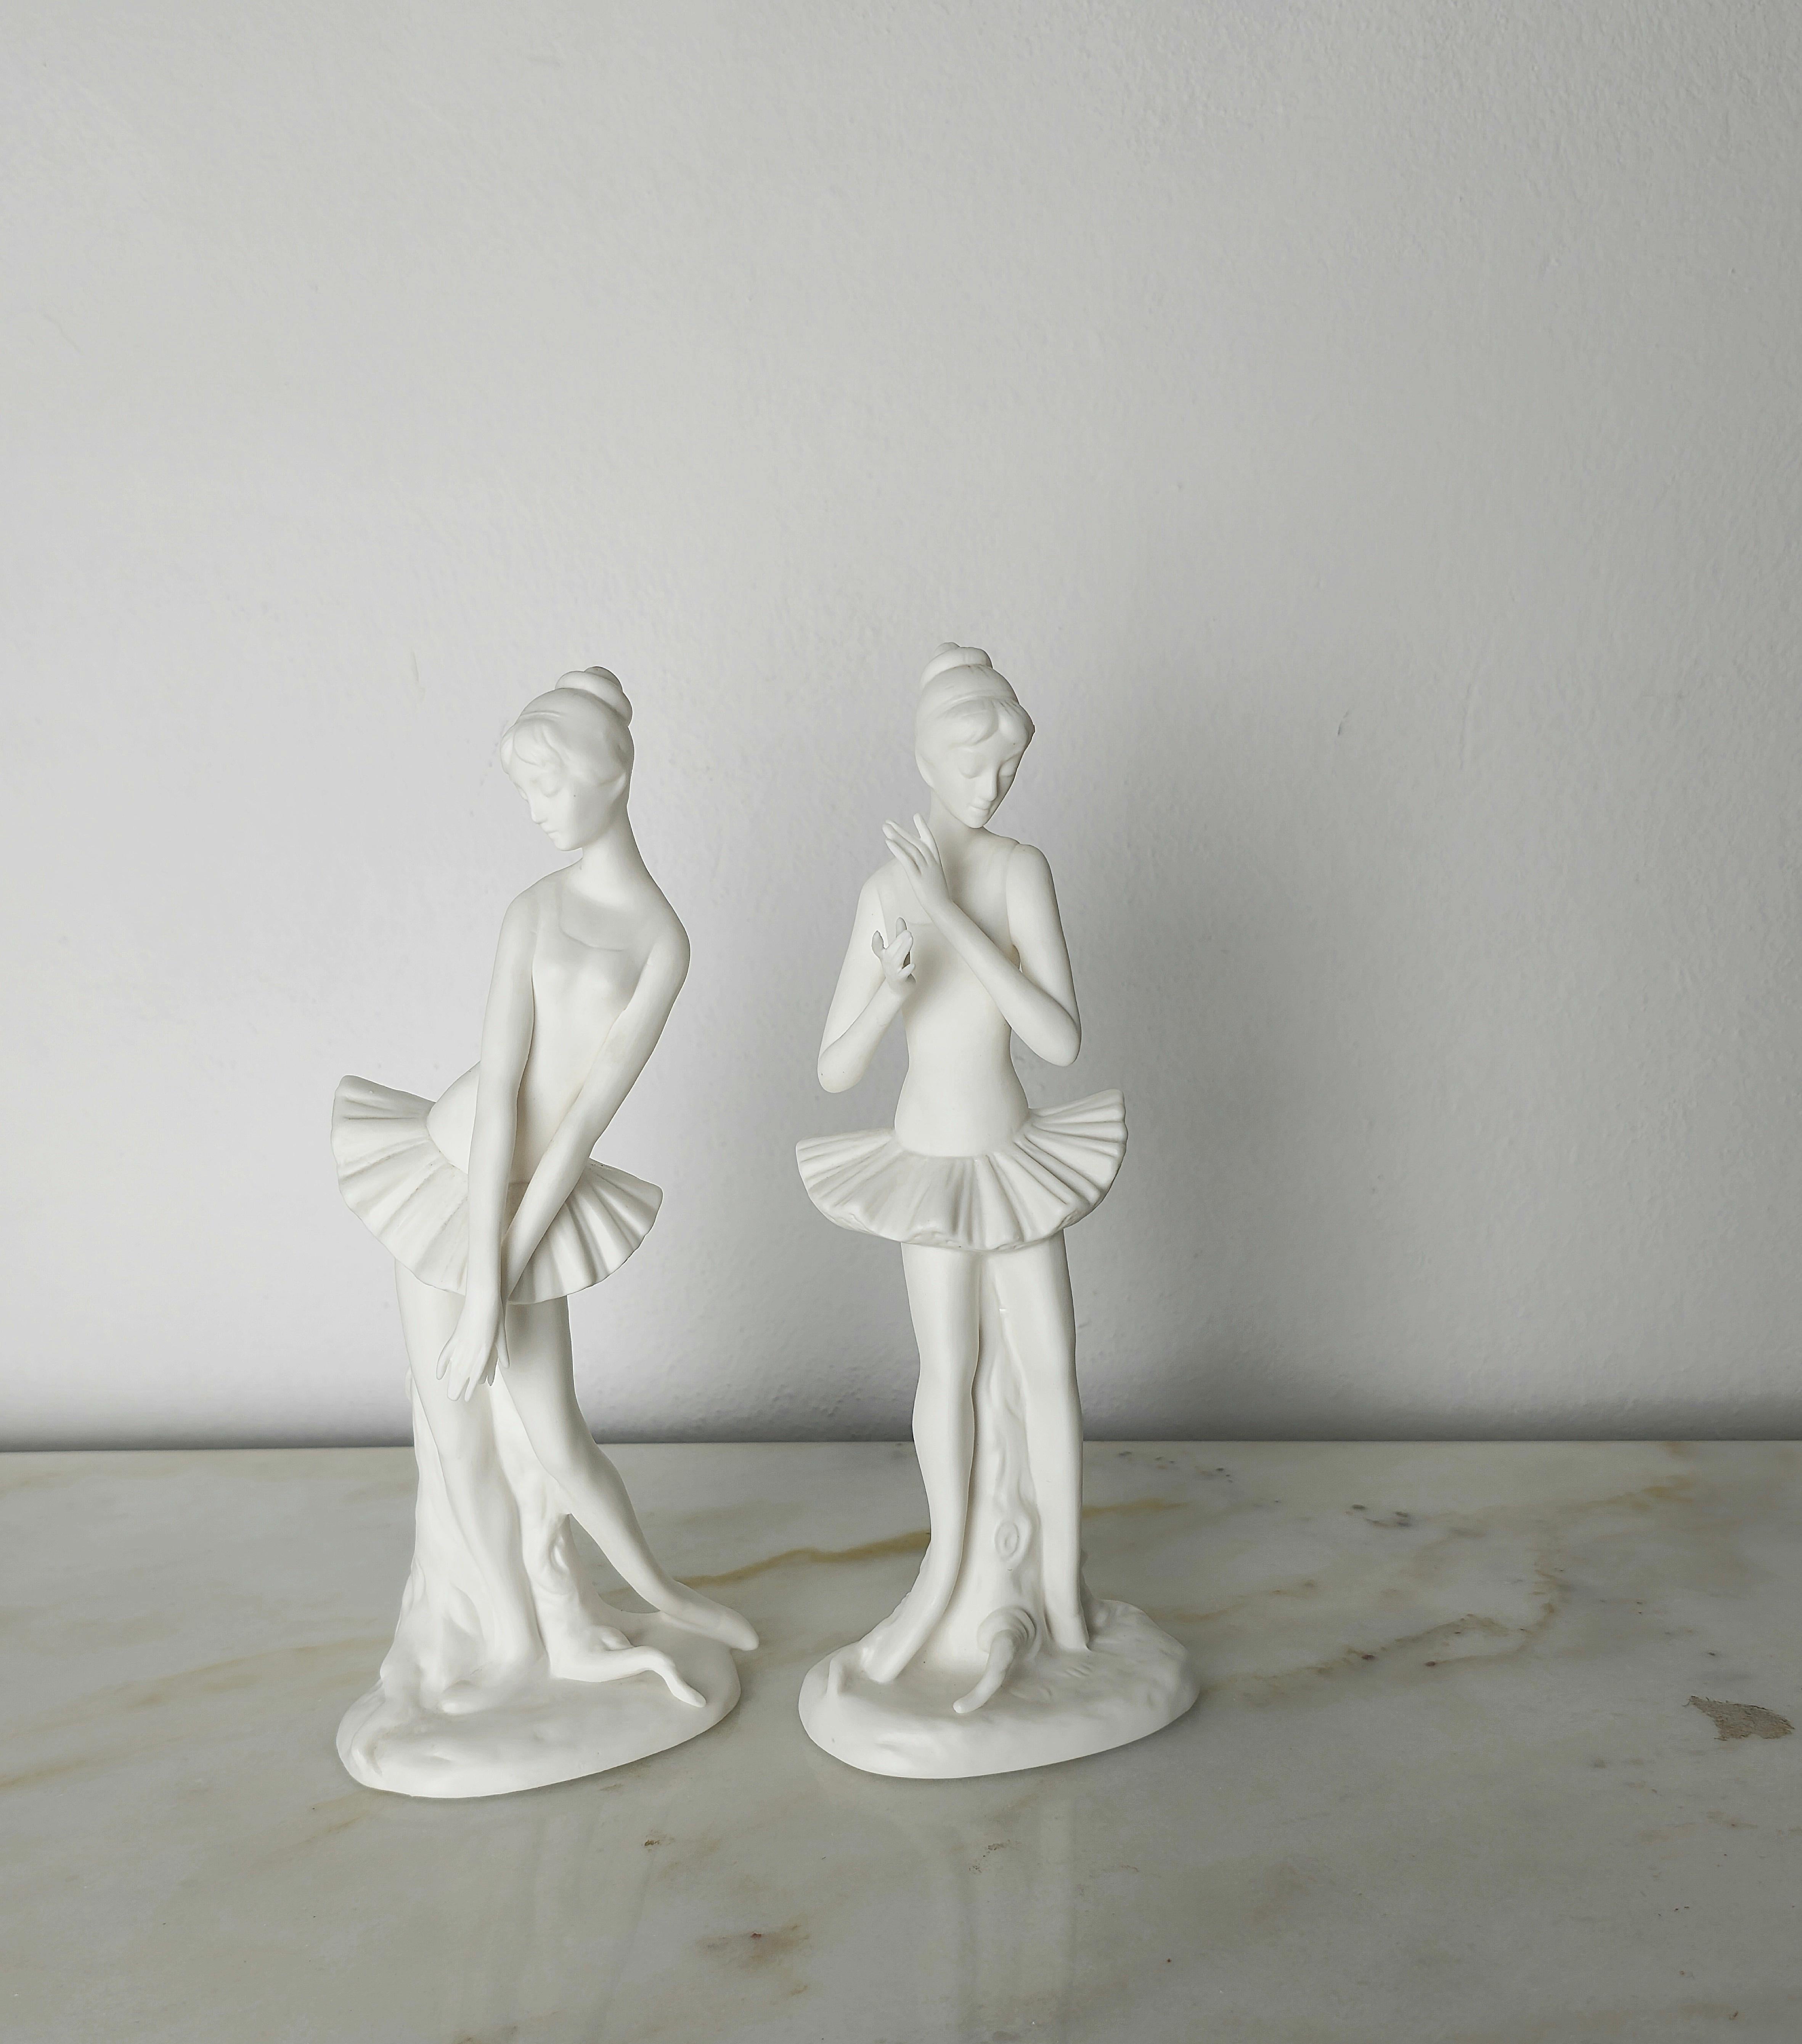 Sculptures Decorative Objects Porcelain Biscuit Midcentury Italy 1950s Set of 2 In Good Condition For Sale In Palermo, IT